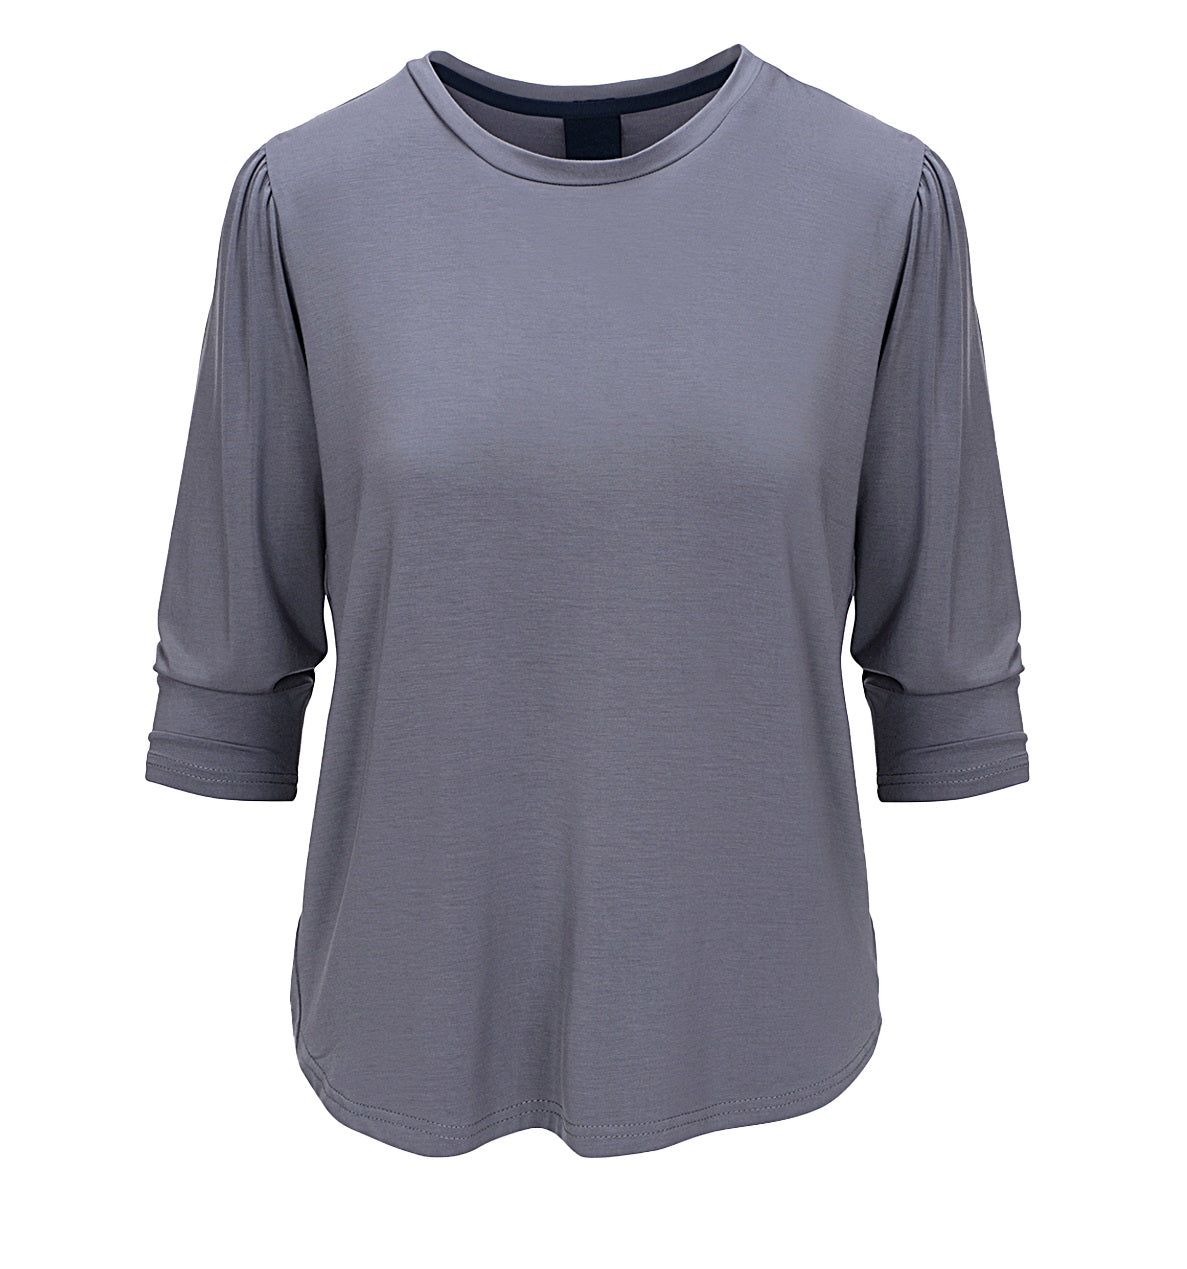 LUXZUZ // ONE TWO Lailong Bamboo T-Shirt 818 Steel Grey